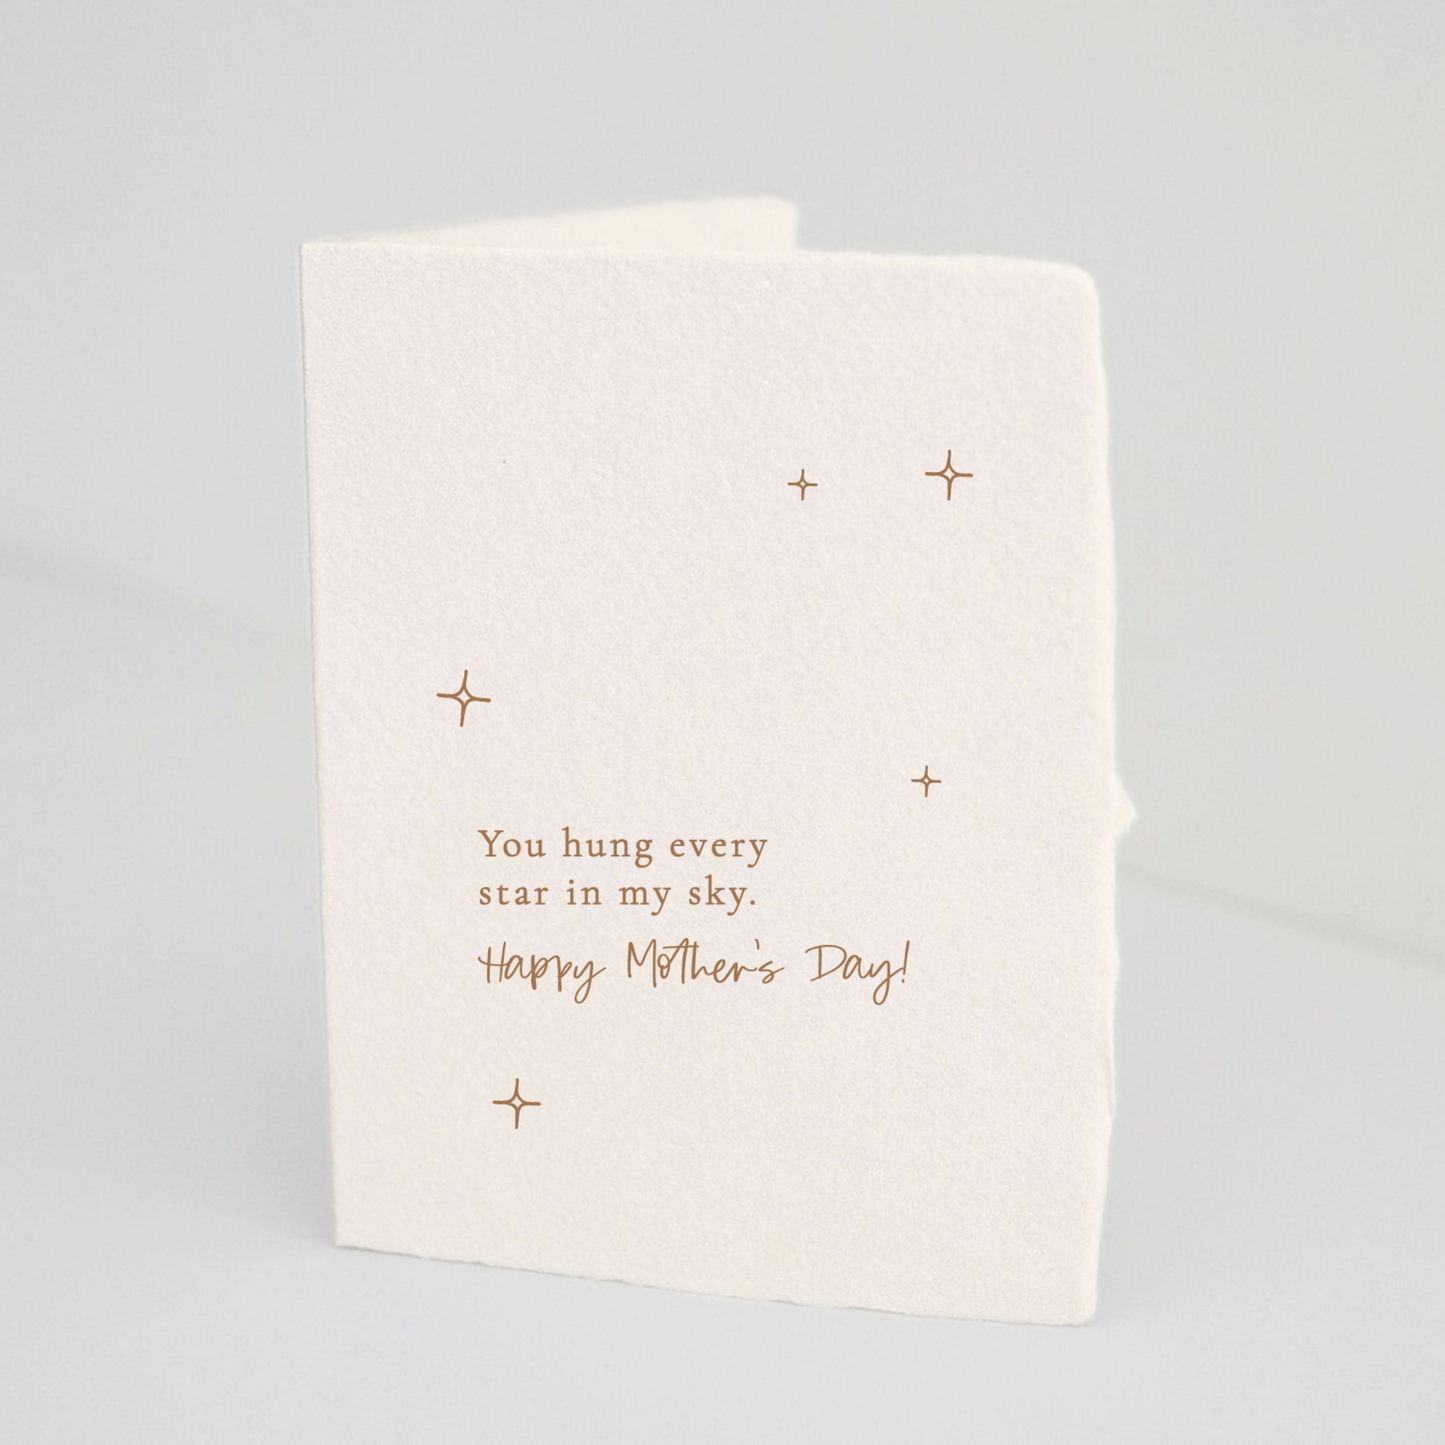 "You hung every star in my sky." Mother's Day Card